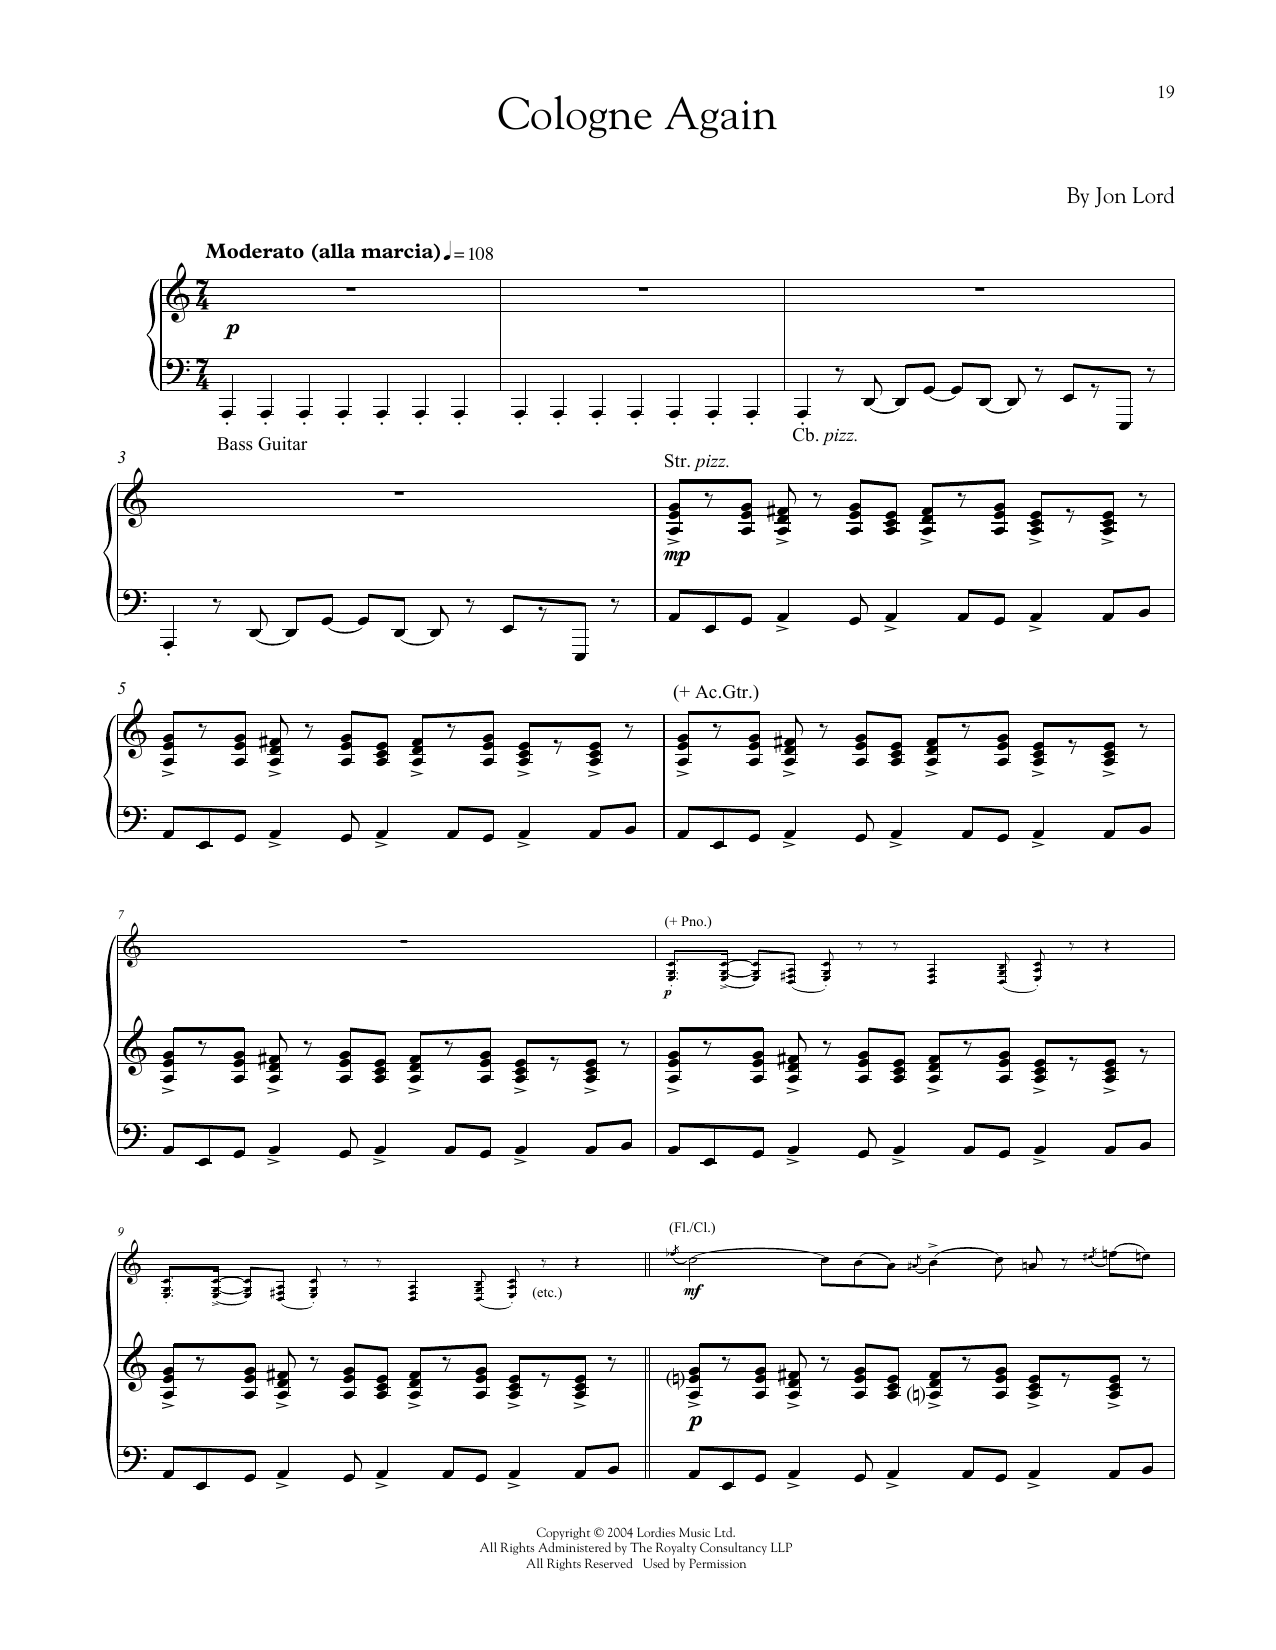 Download Jon Lord Cologne Again Sheet Music